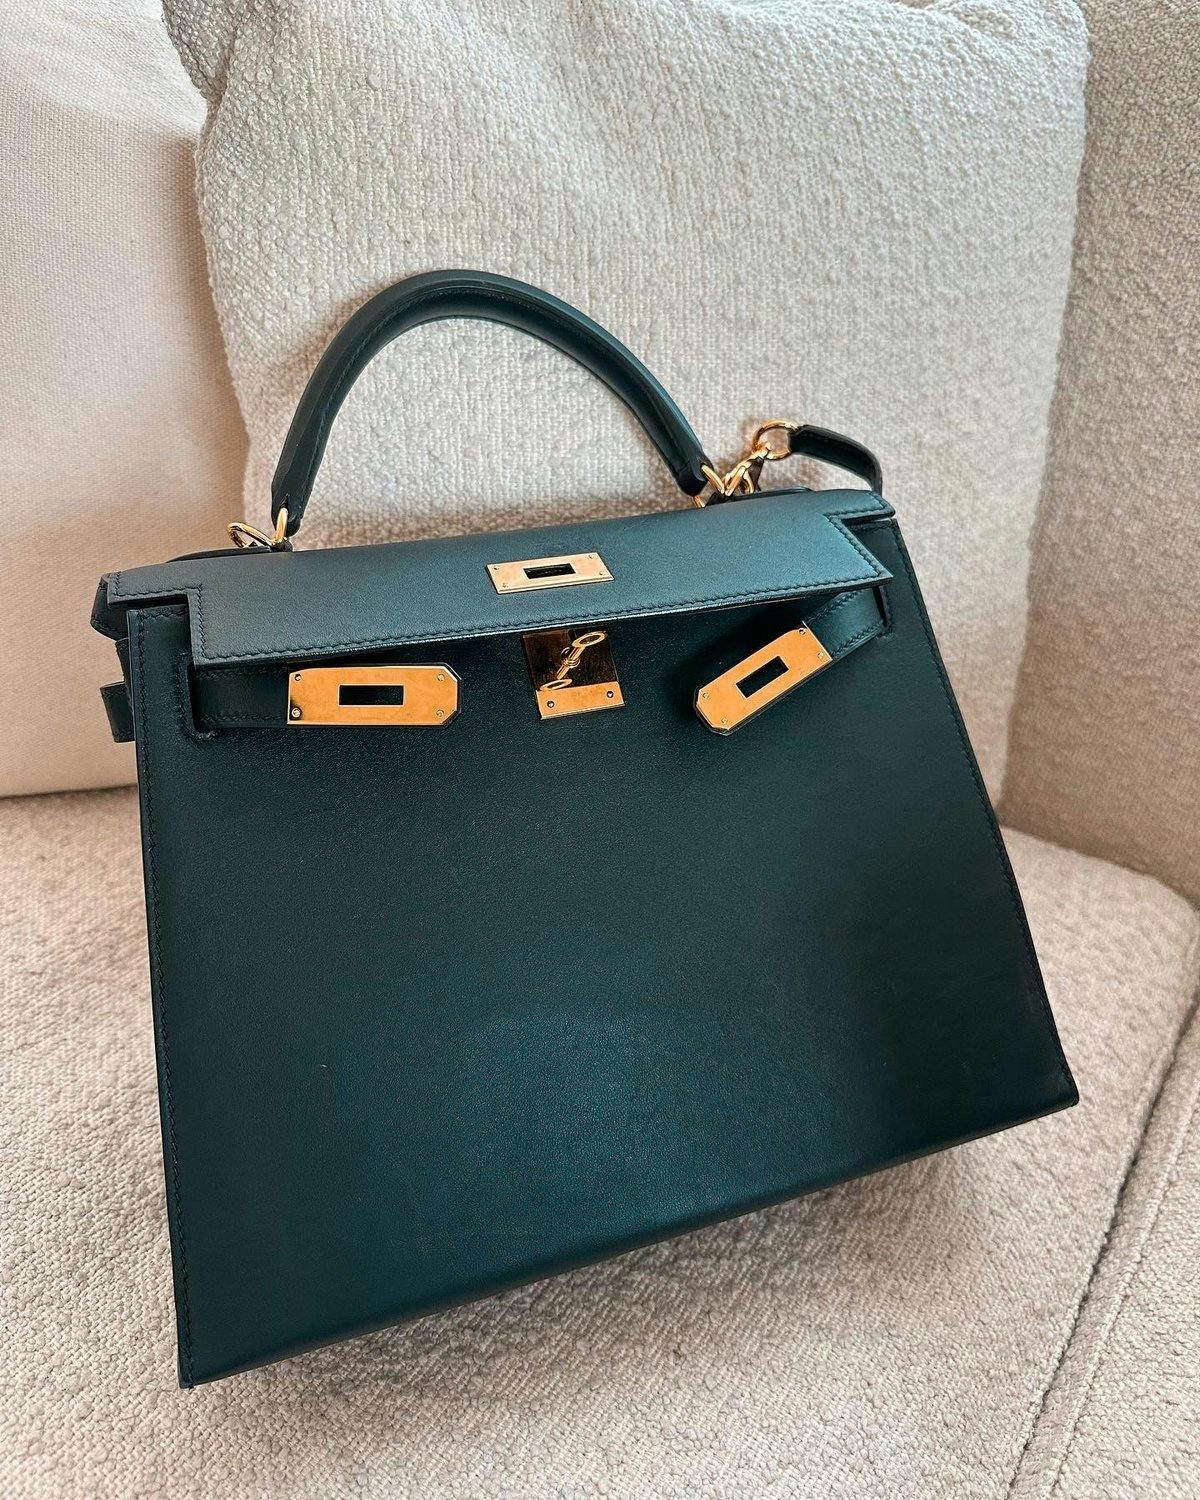 A Full Review of Hermes Kelly 28 - Pros and Cons, Variations and a buying guide by Sachini Dilanka 